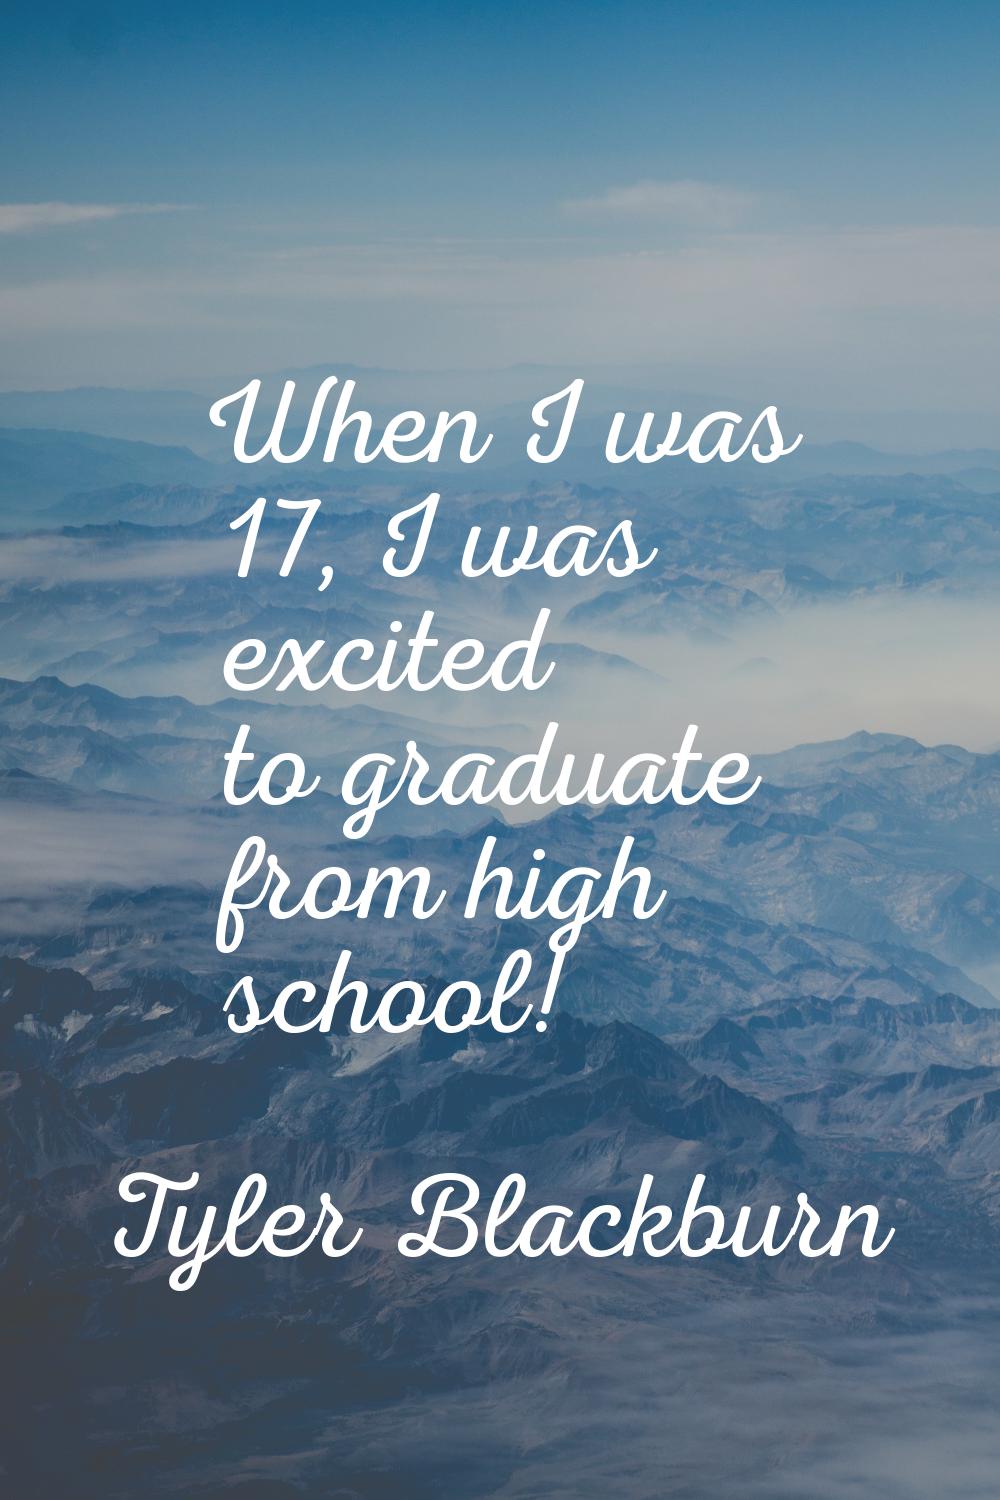 When I was 17, I was excited to graduate from high school!